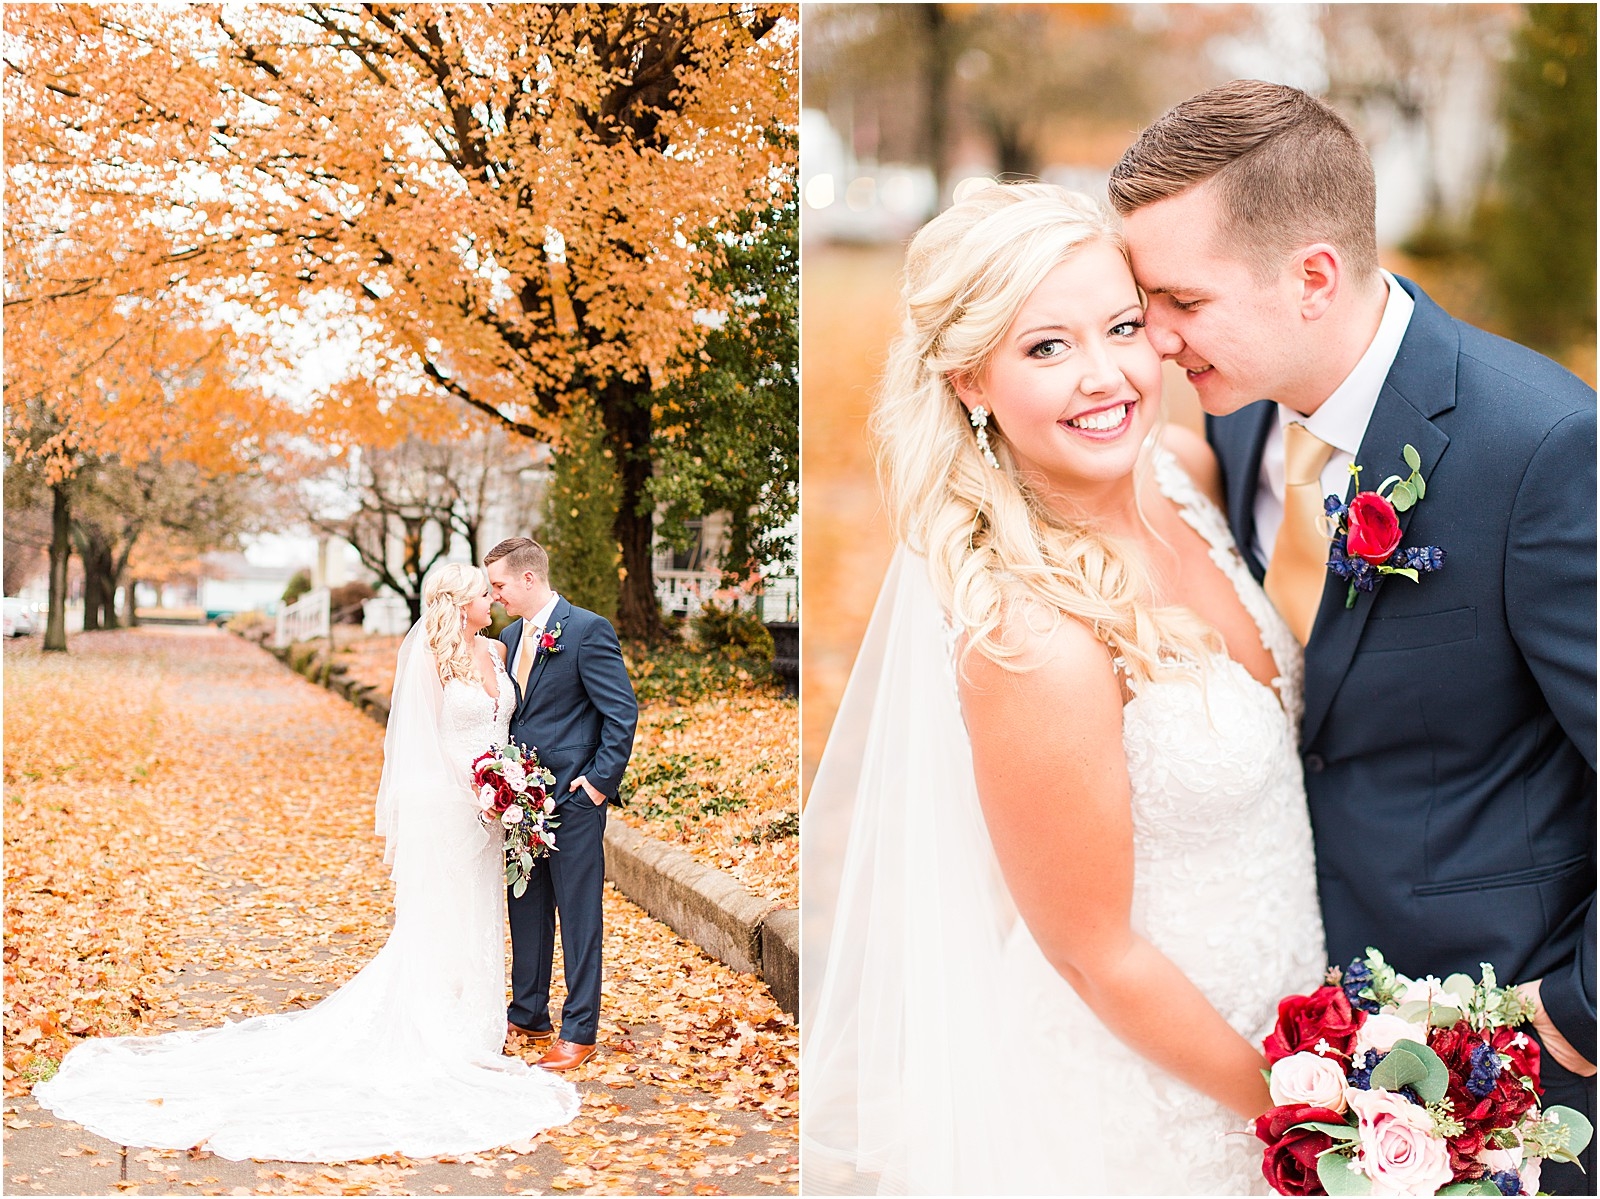 Haylee and Dillon's Evansville, Indiana wedding by Bret and Brandie Photography.0070.jpg